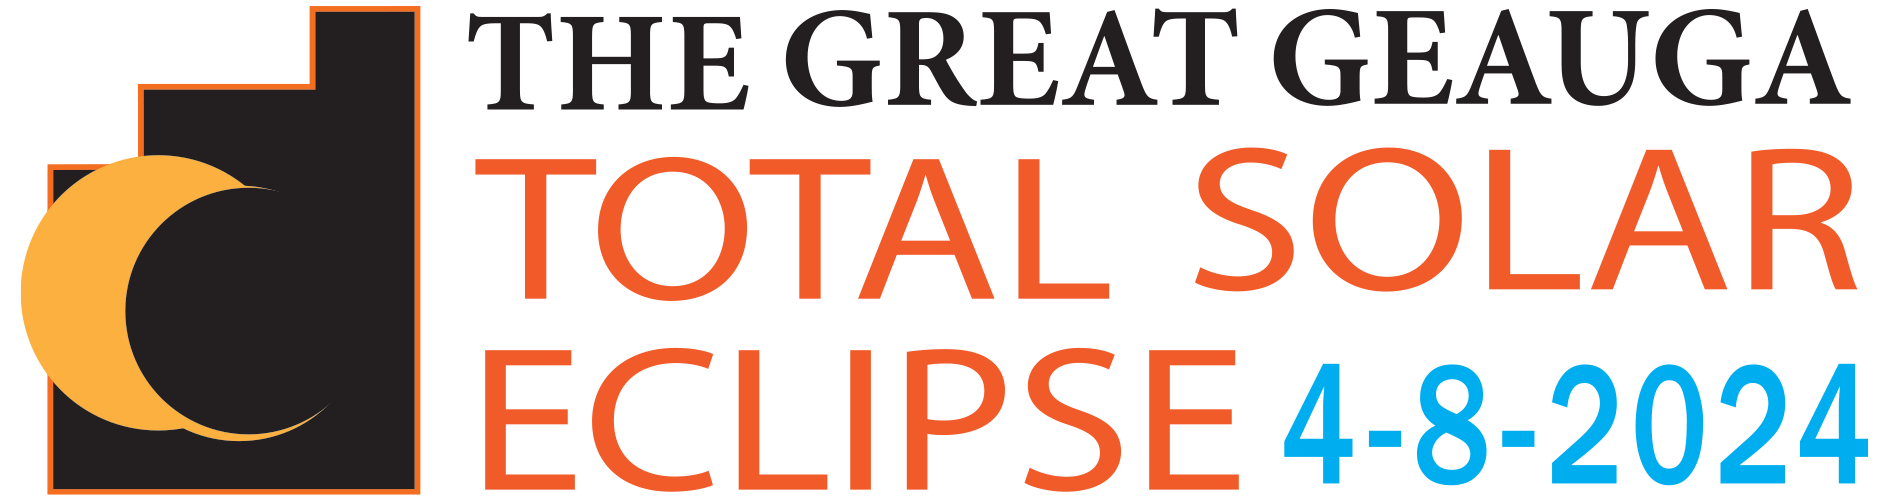 The Great Geauga Total Solar Eclipse April 8, 2024